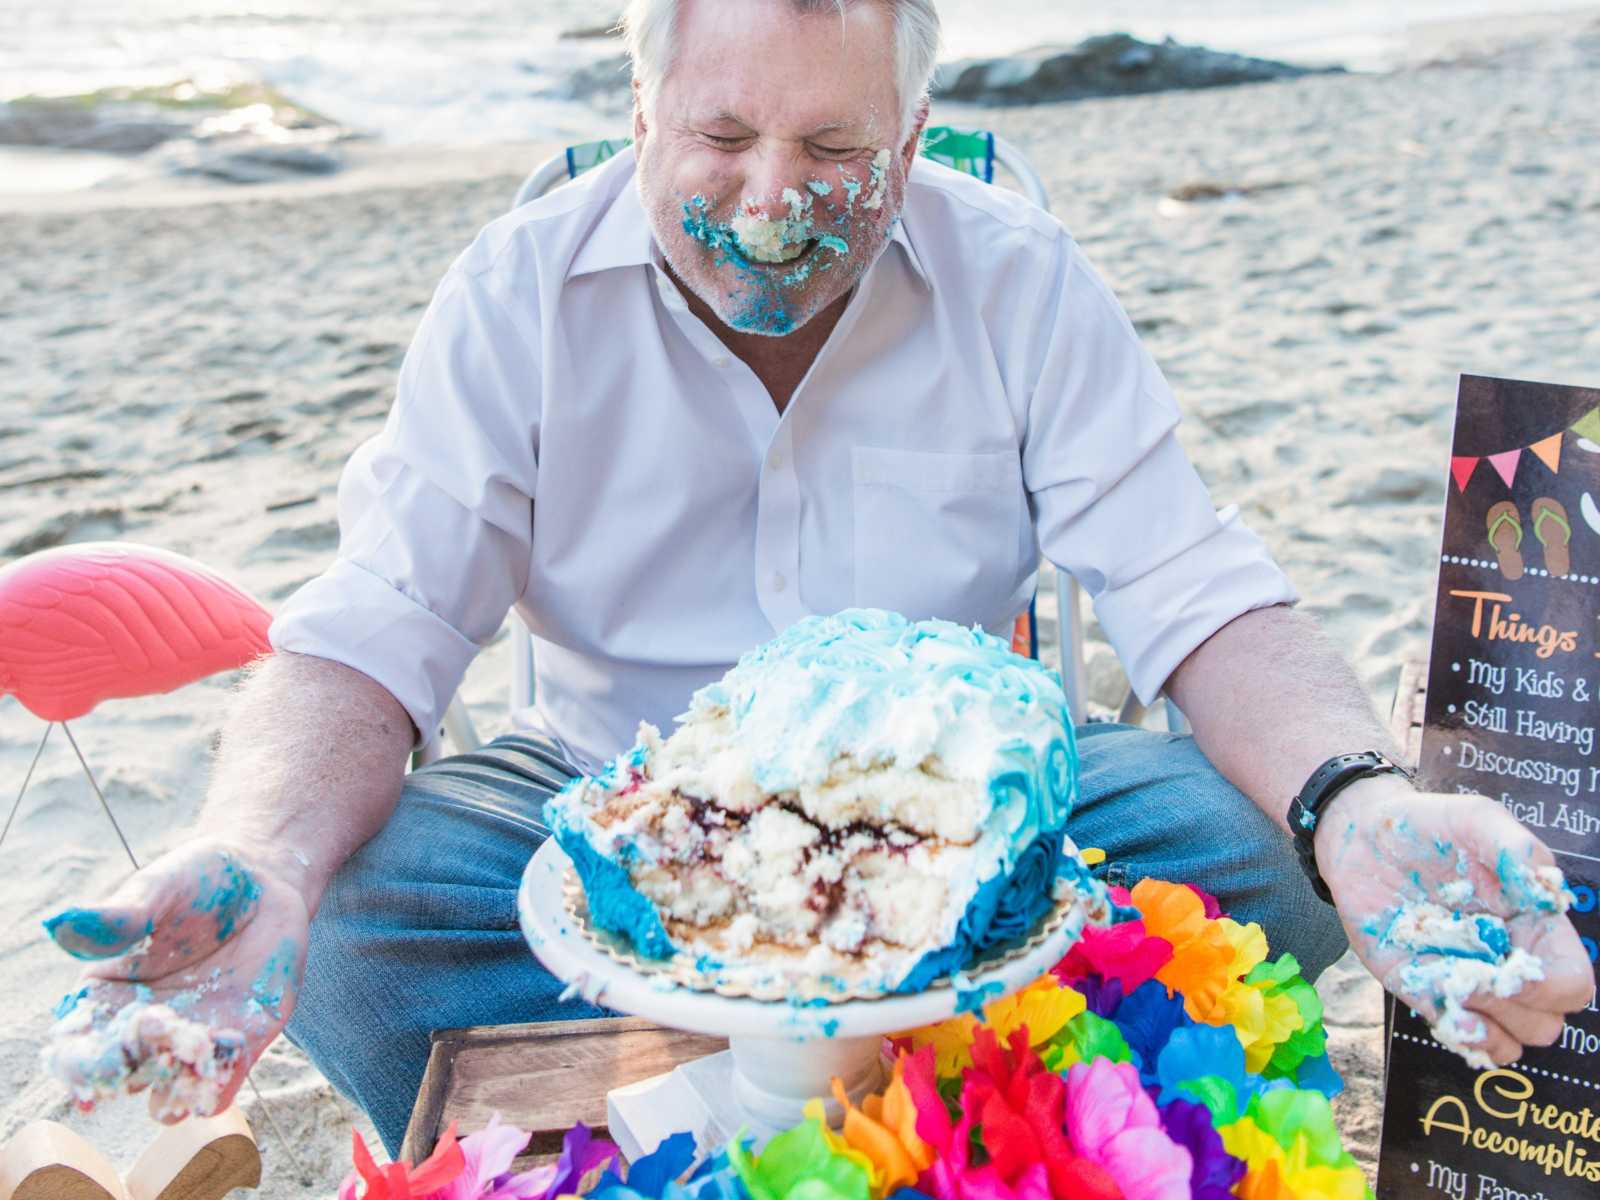 man smiles as he tears apart birthday cake that is now all over his face and hands on the beach